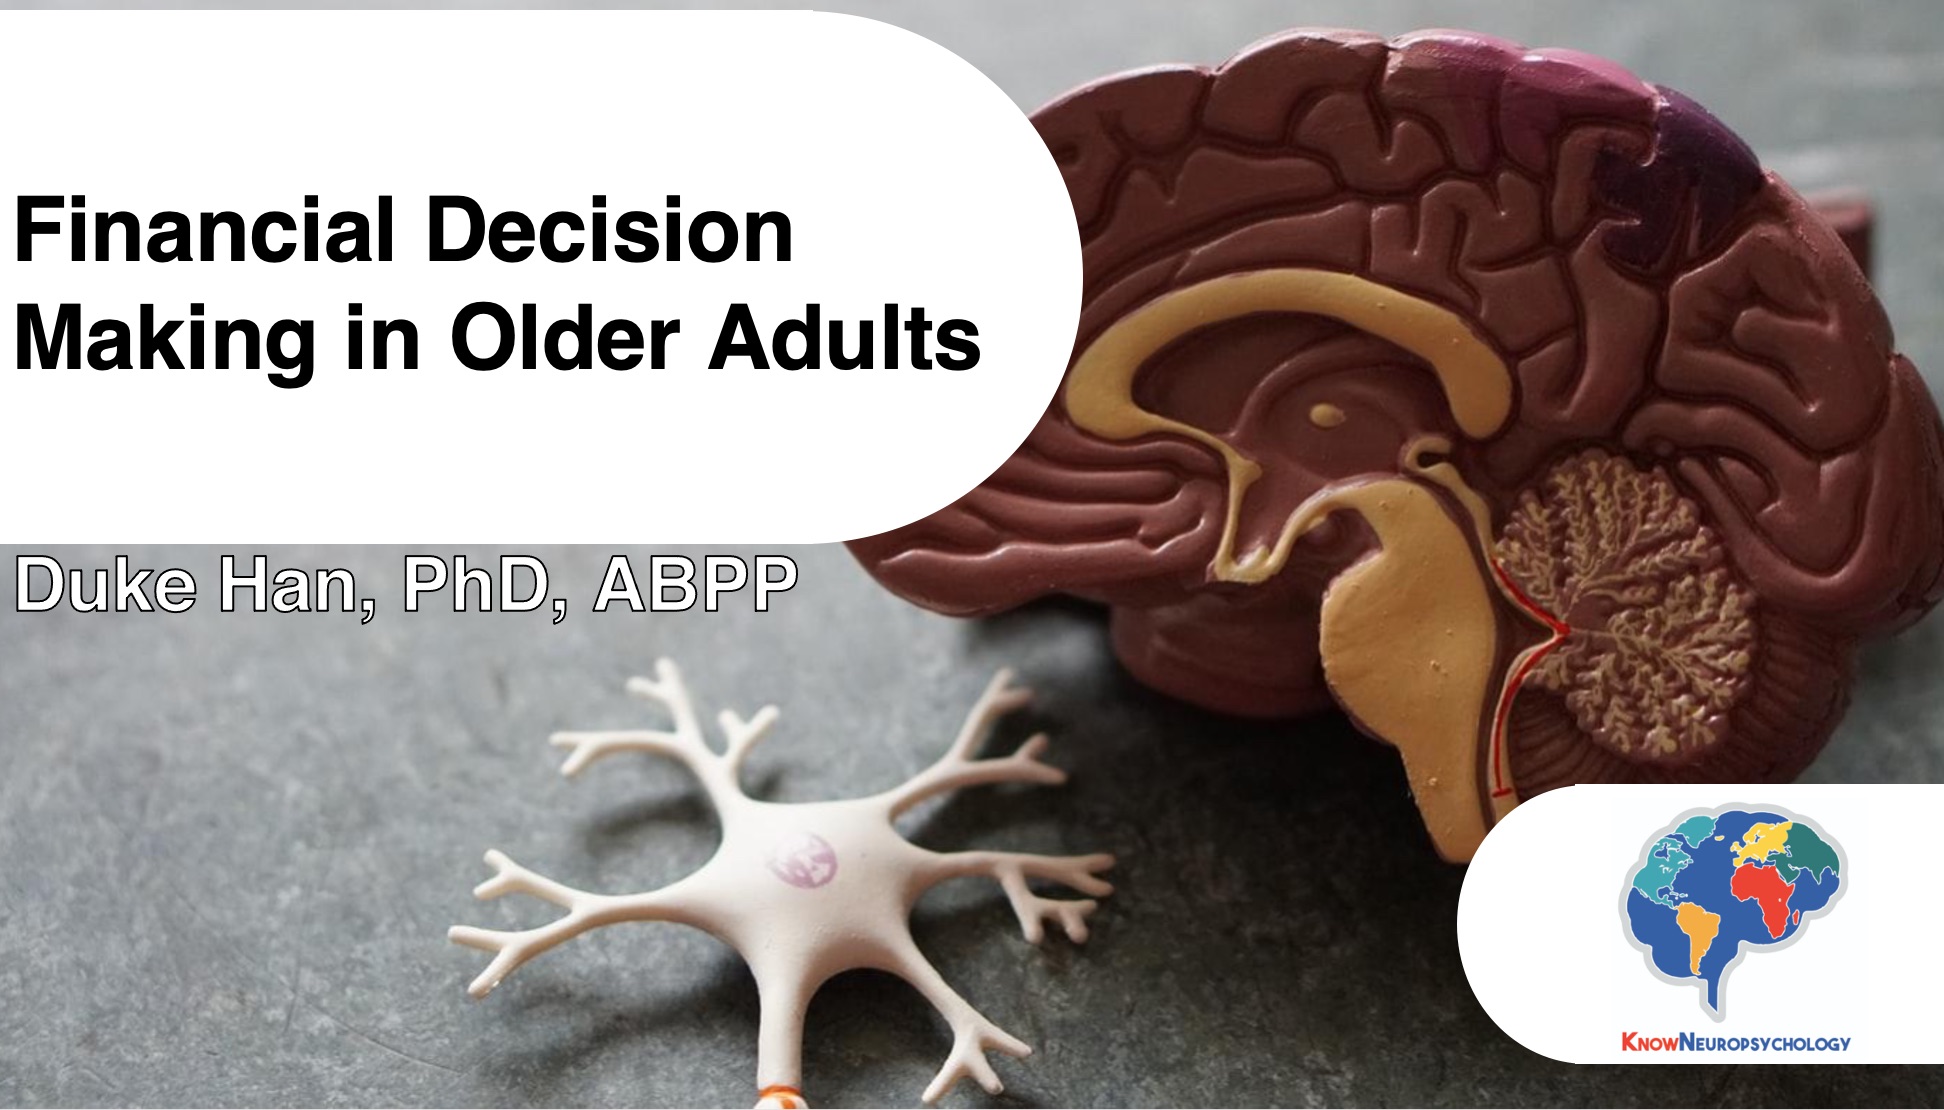 Financial Decision Making in Older Adults on Monday 10/17/2022 at 5:00pm EST with Dr. Duke Han